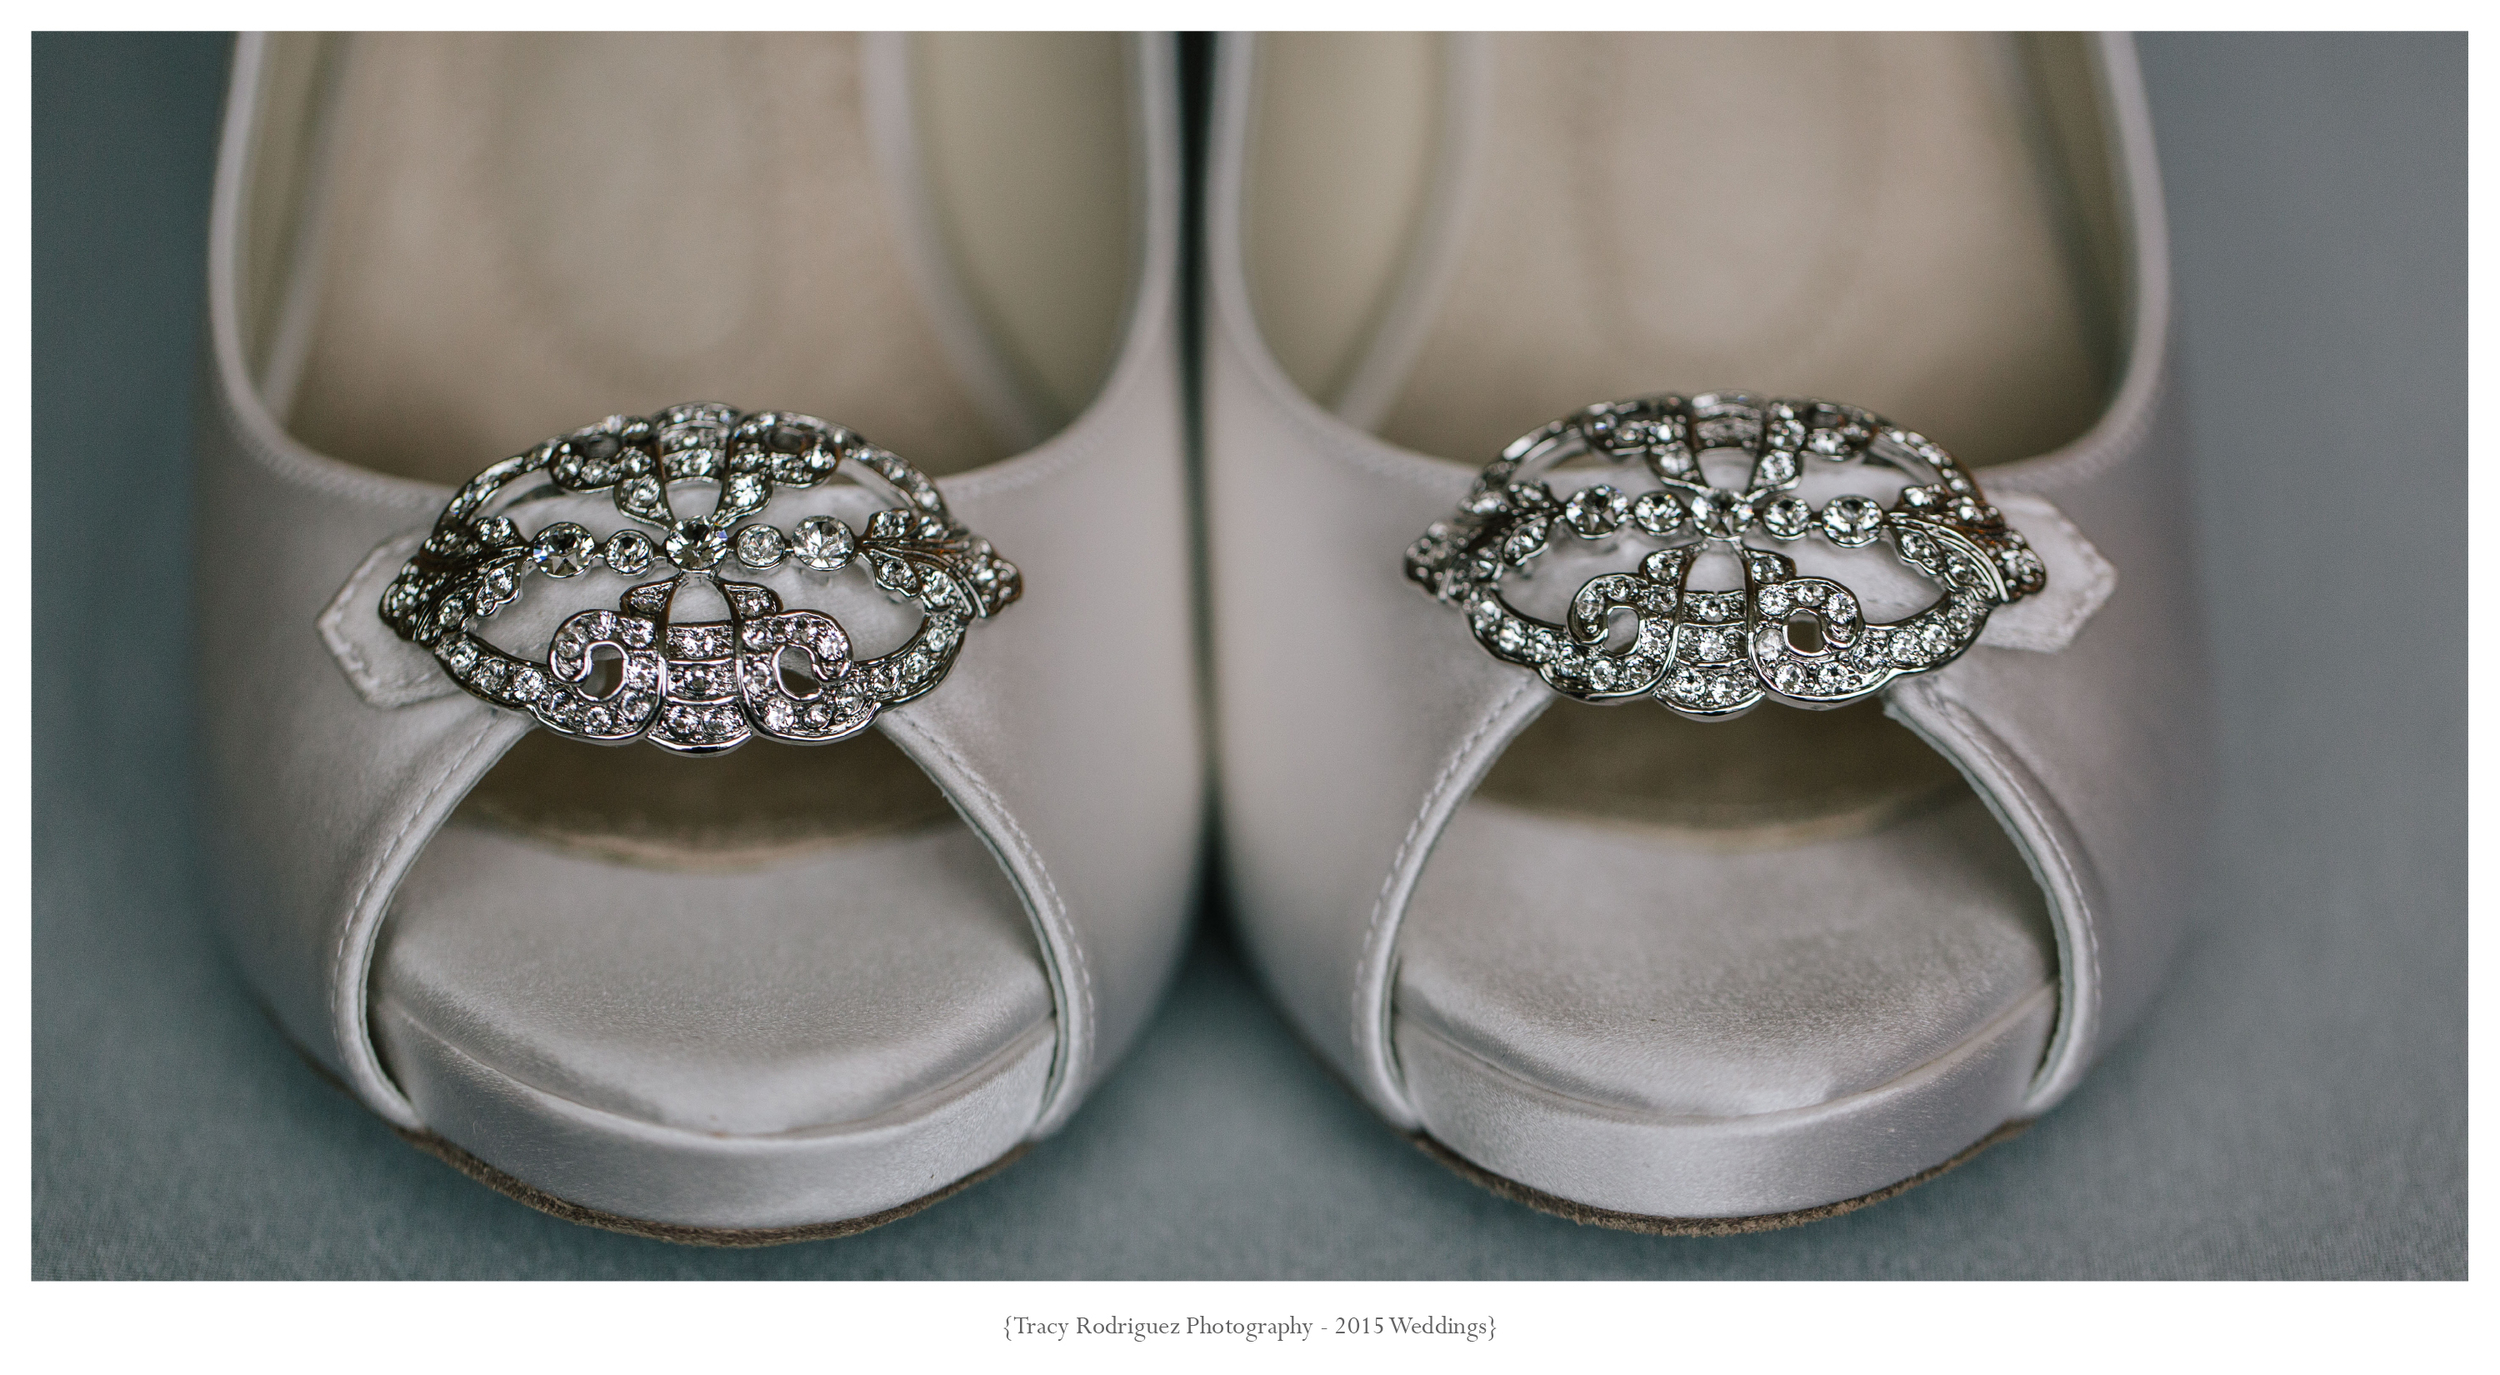 Canton, MA Wedding at Blue Hill Country Club by Tracy Rodriguez Photography